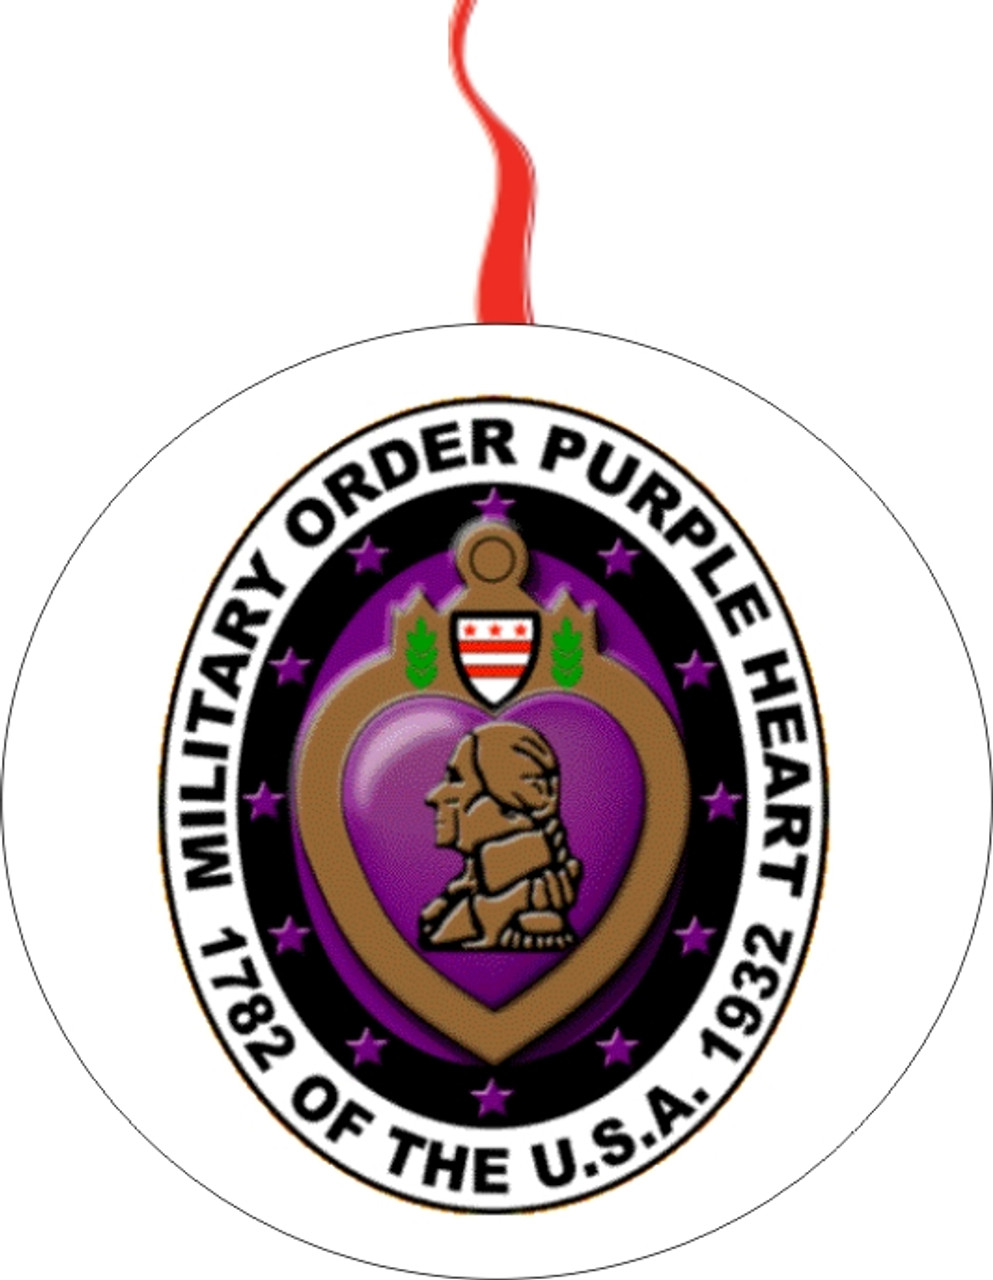 Military Order Of Purple Heart Christmas  Ornament